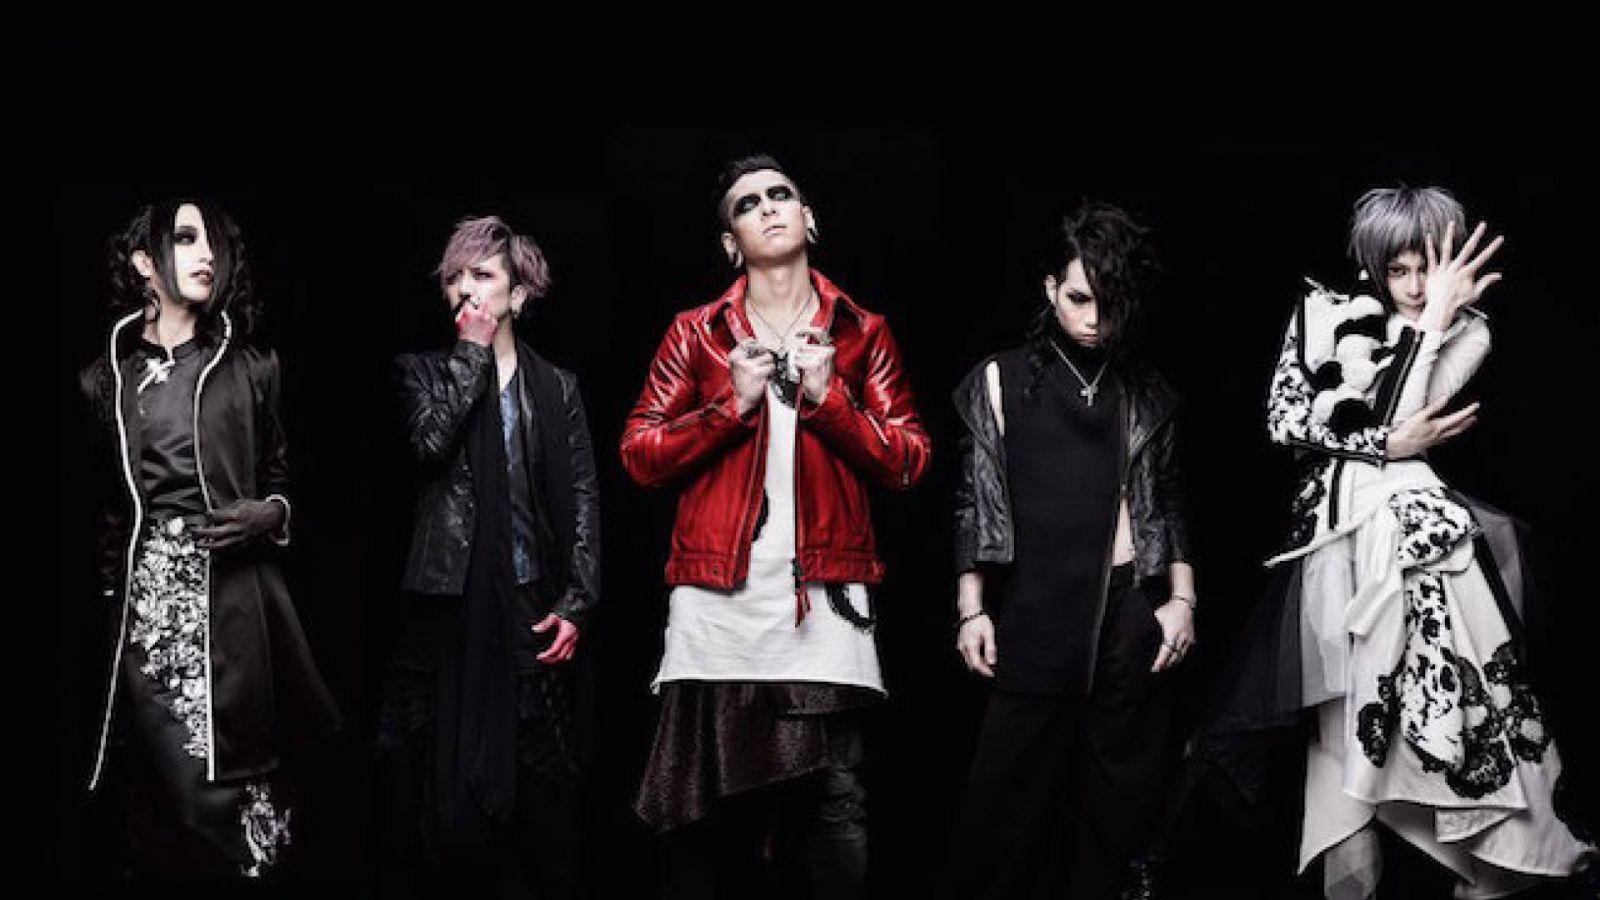 NOCTURNAL BLOODLUST to Lose Two Members © NOCTURNAL BLOODLUST